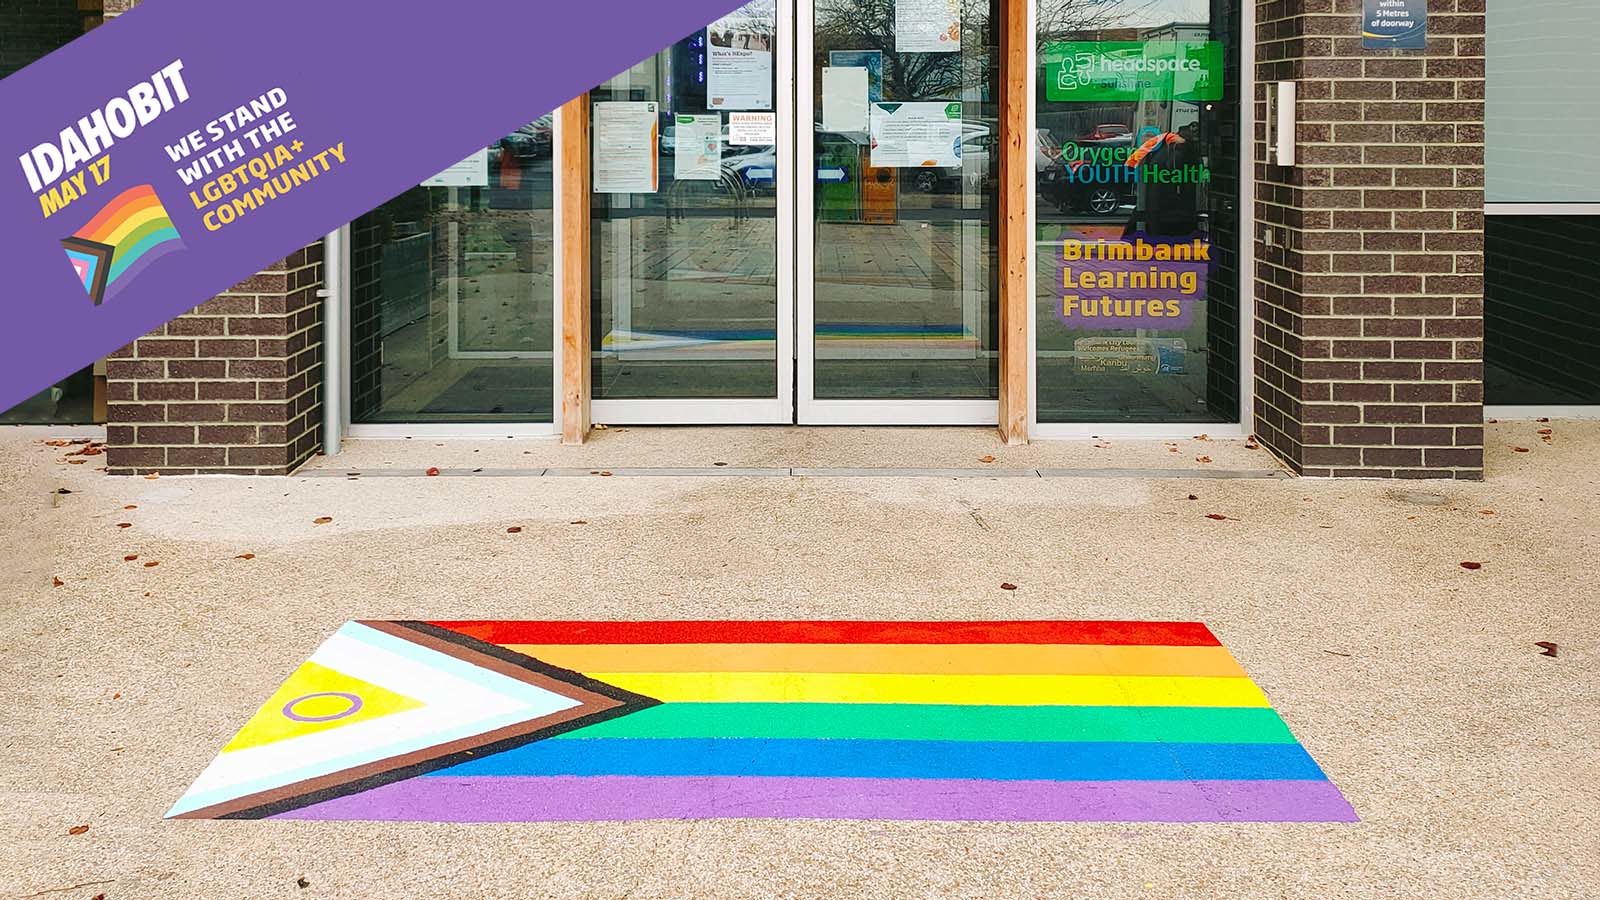 Pride rainbow flag on the ground in front of the doors to Visy Cares Hub. Message in top left corner: IDAHOBIT May 17 We stand with LGBTIQA+ communiities